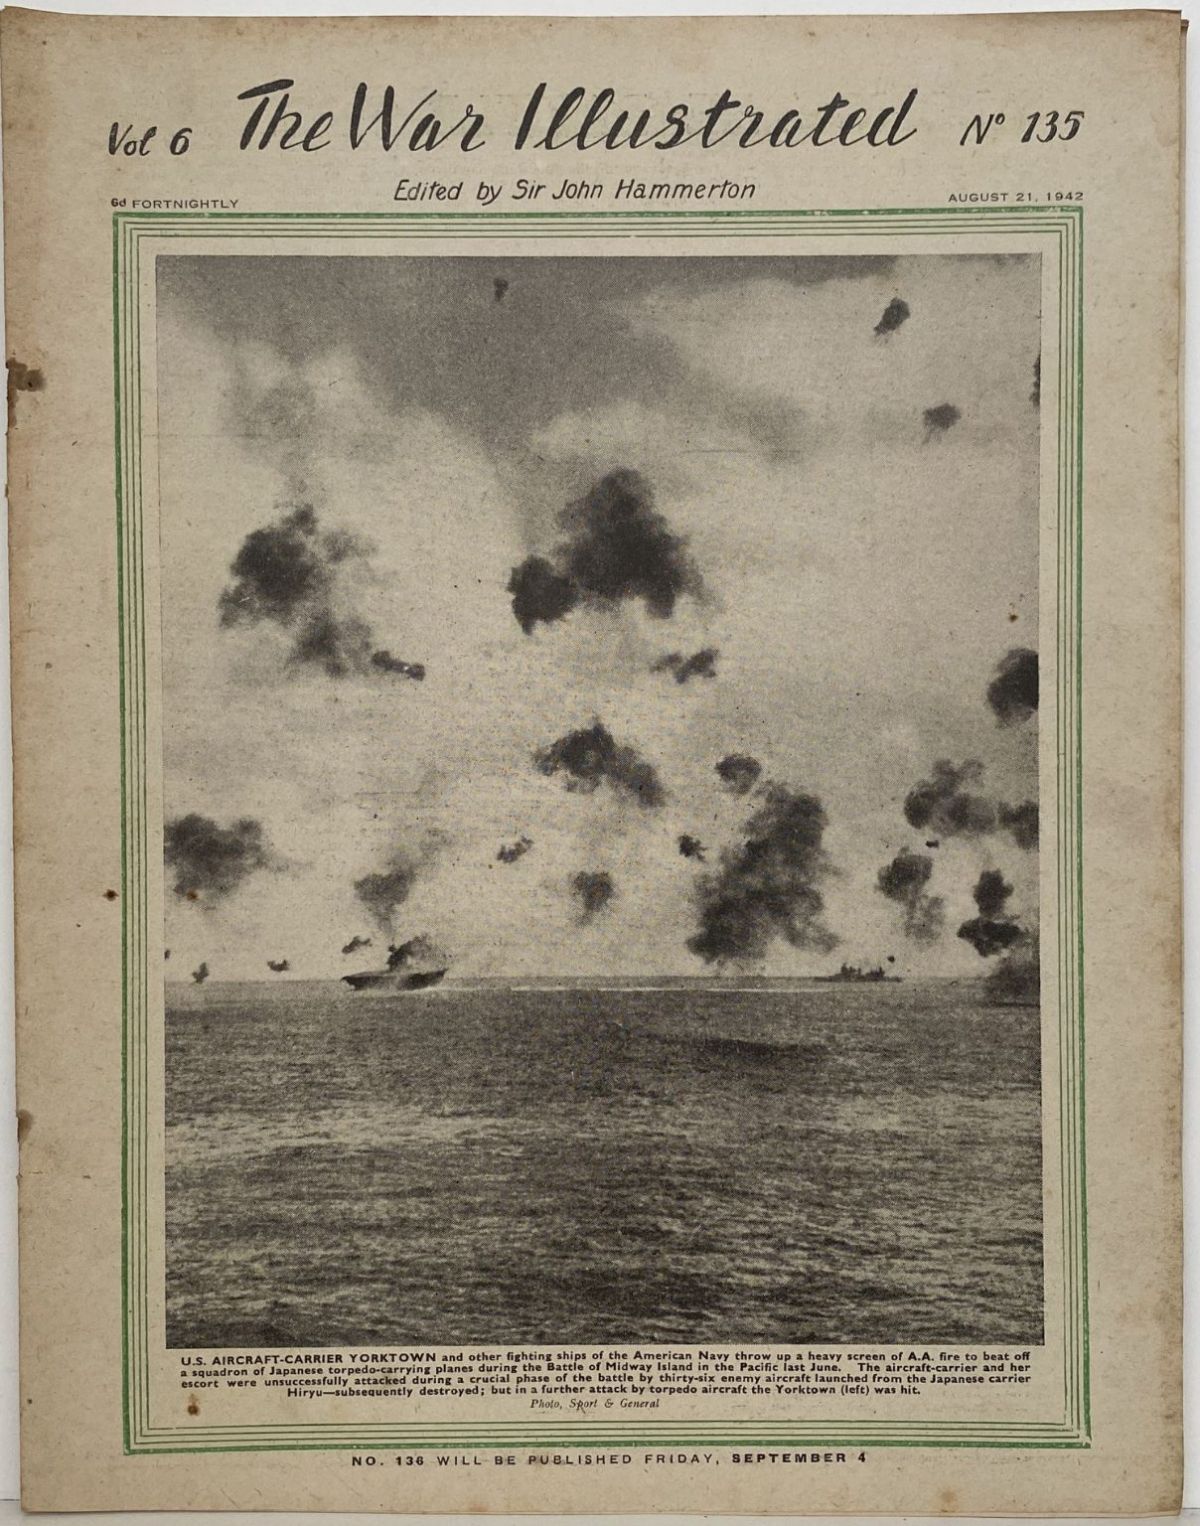 THE WAR ILLUSTRATED - Vol 6, No 135, 21st Aug 1942